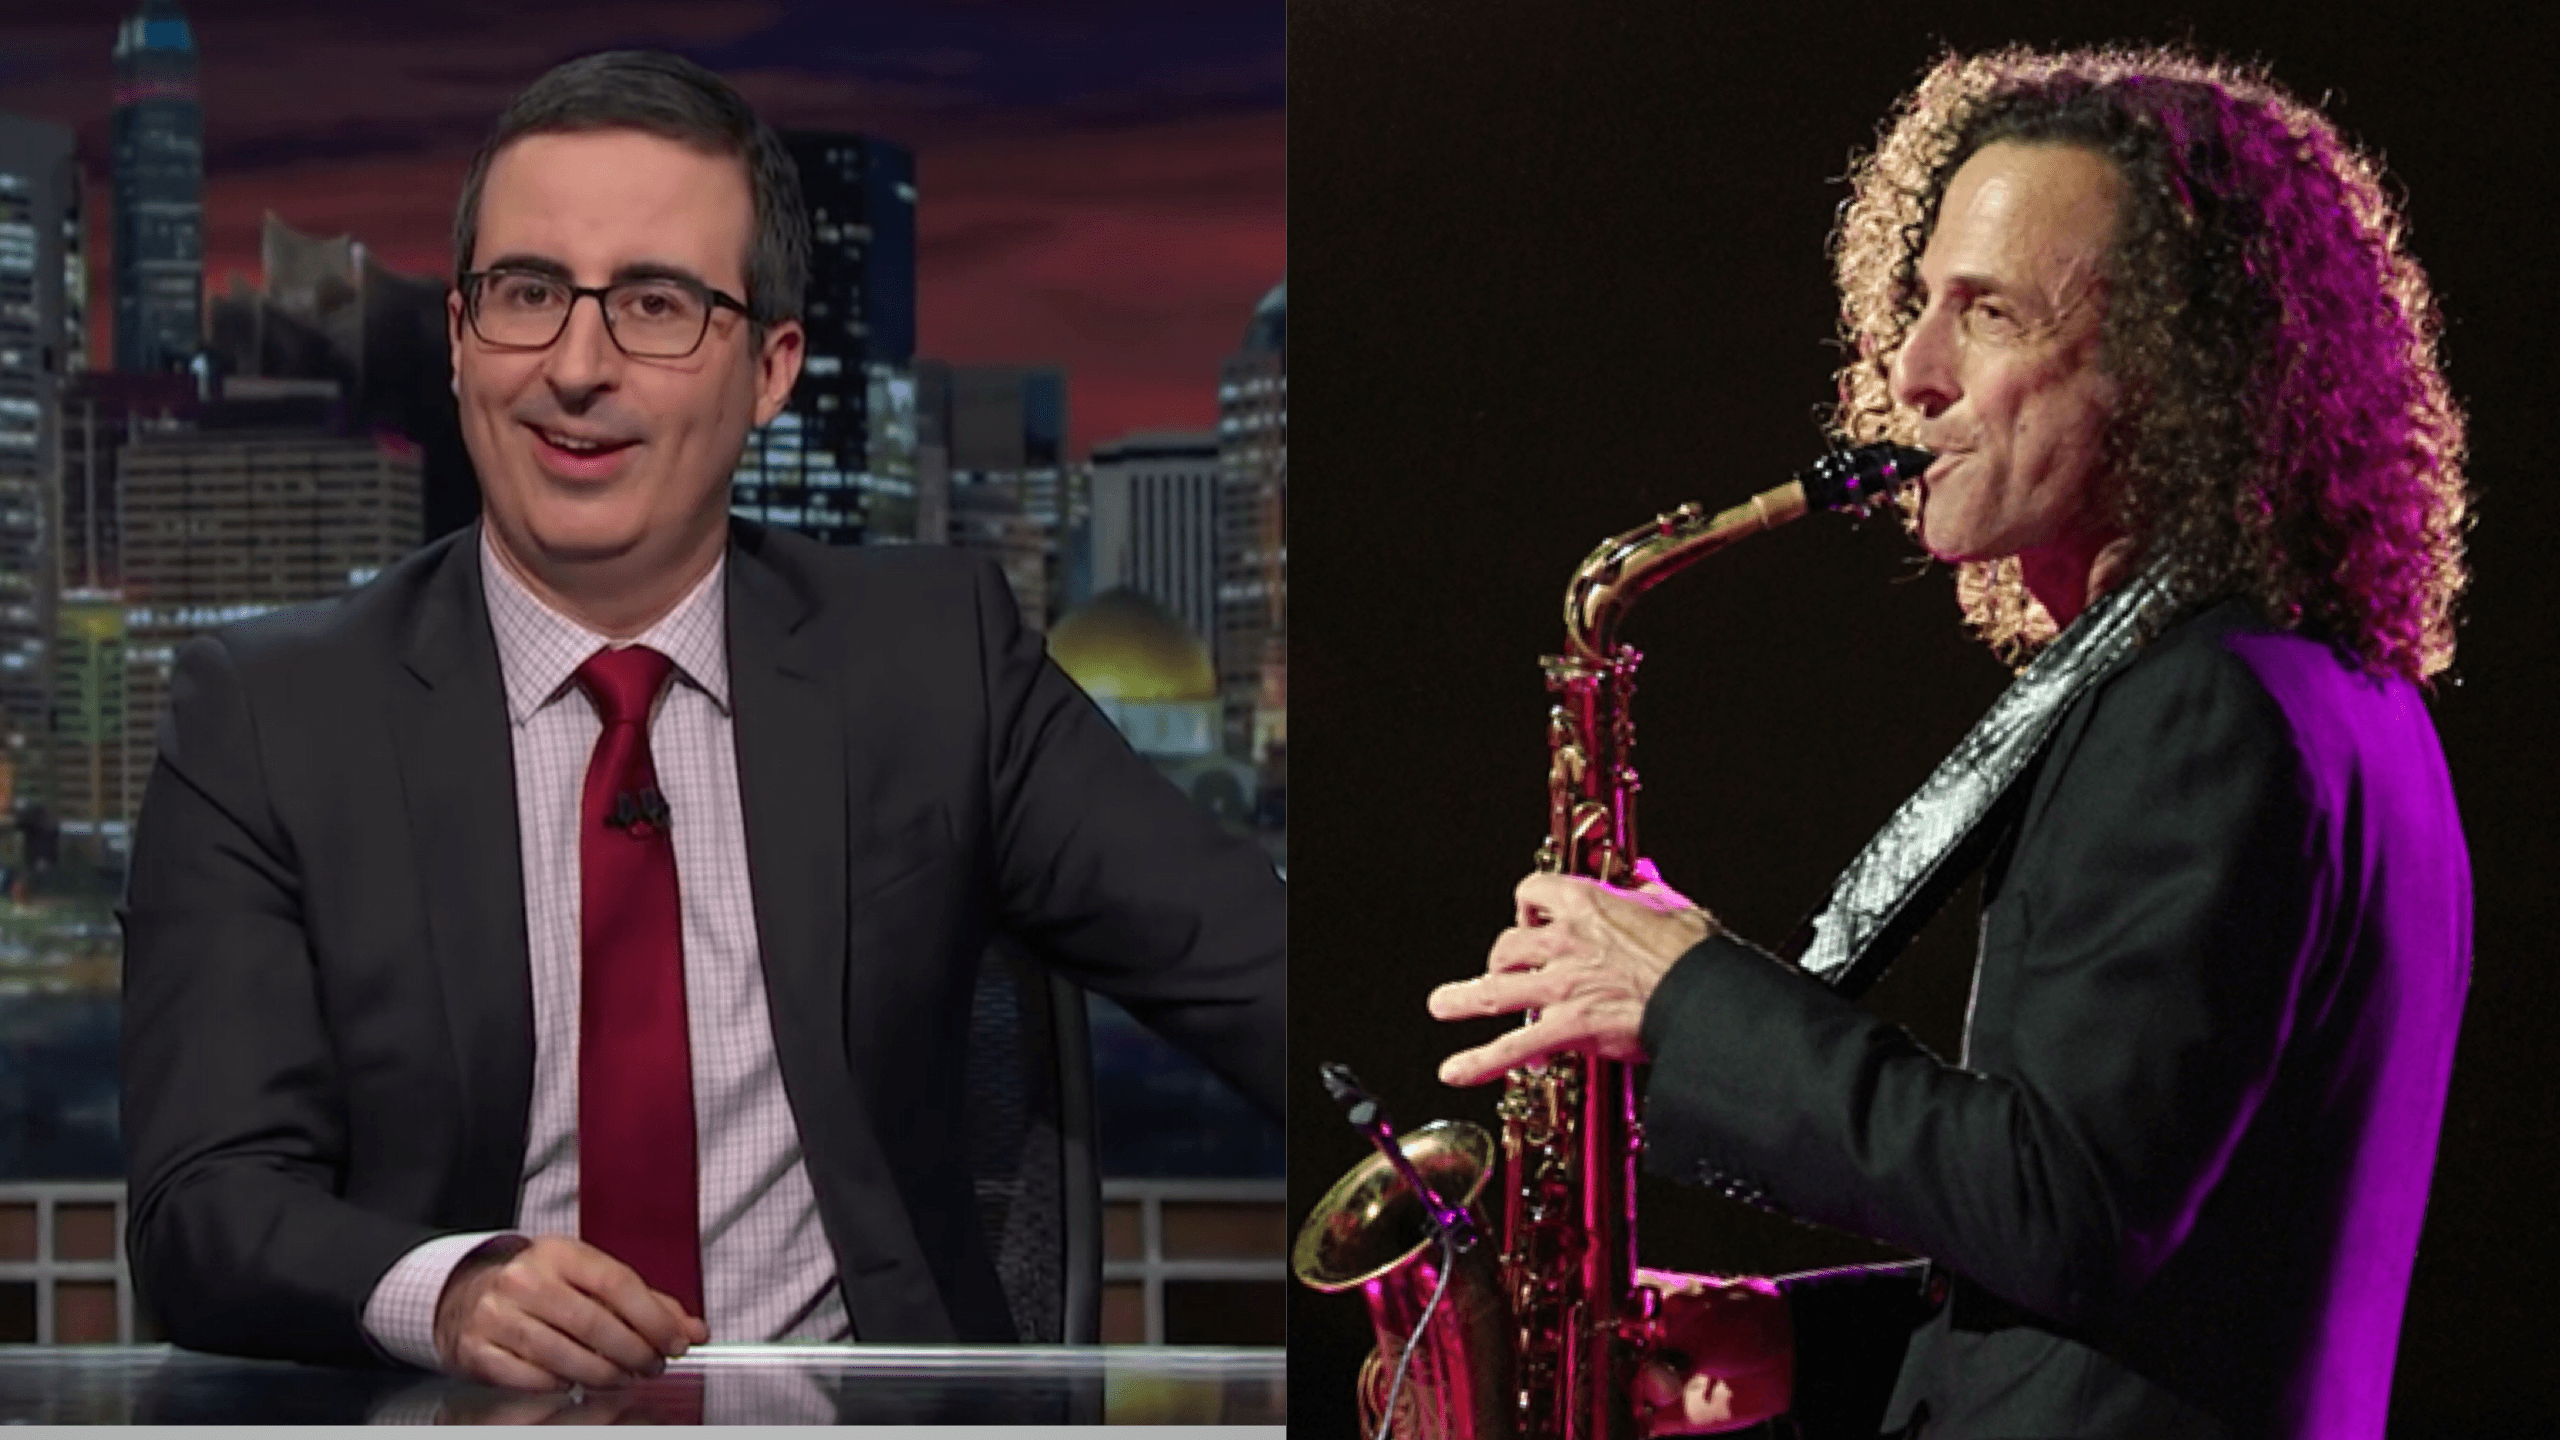 WATCH: John Oliver suggests Kenny G as ‘smooth’ solution to West Philippine Sea dispute